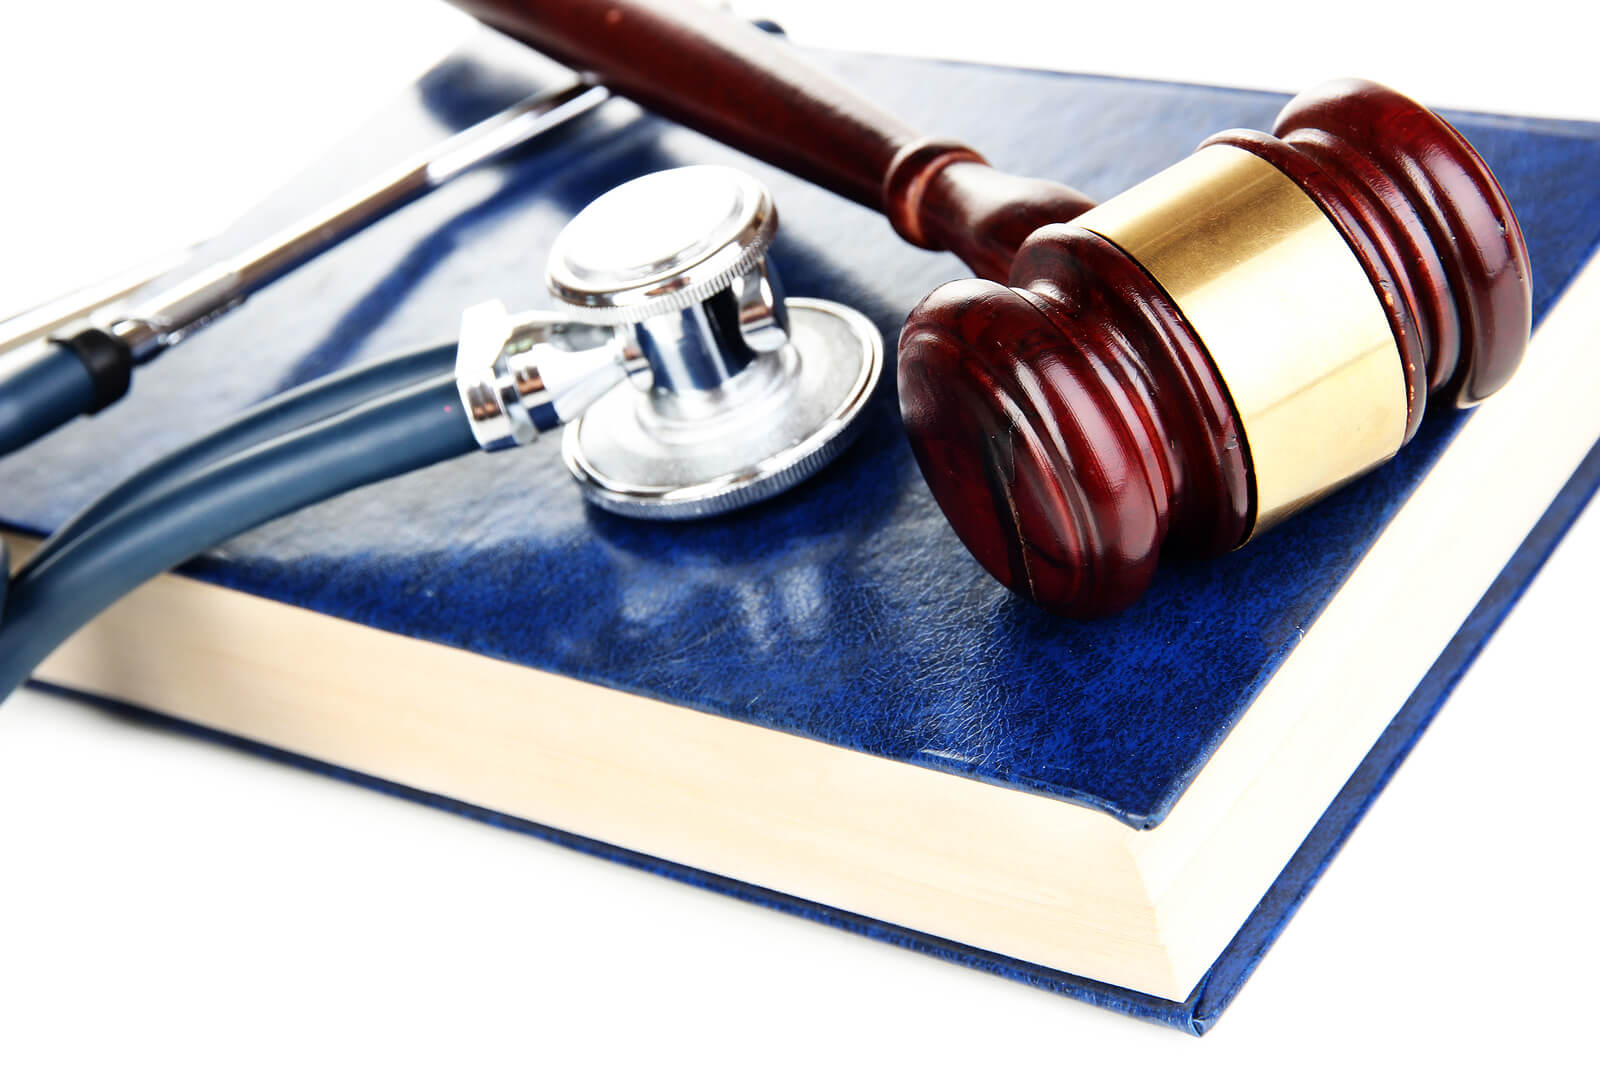 An analysis of medical negligence - iPleaders